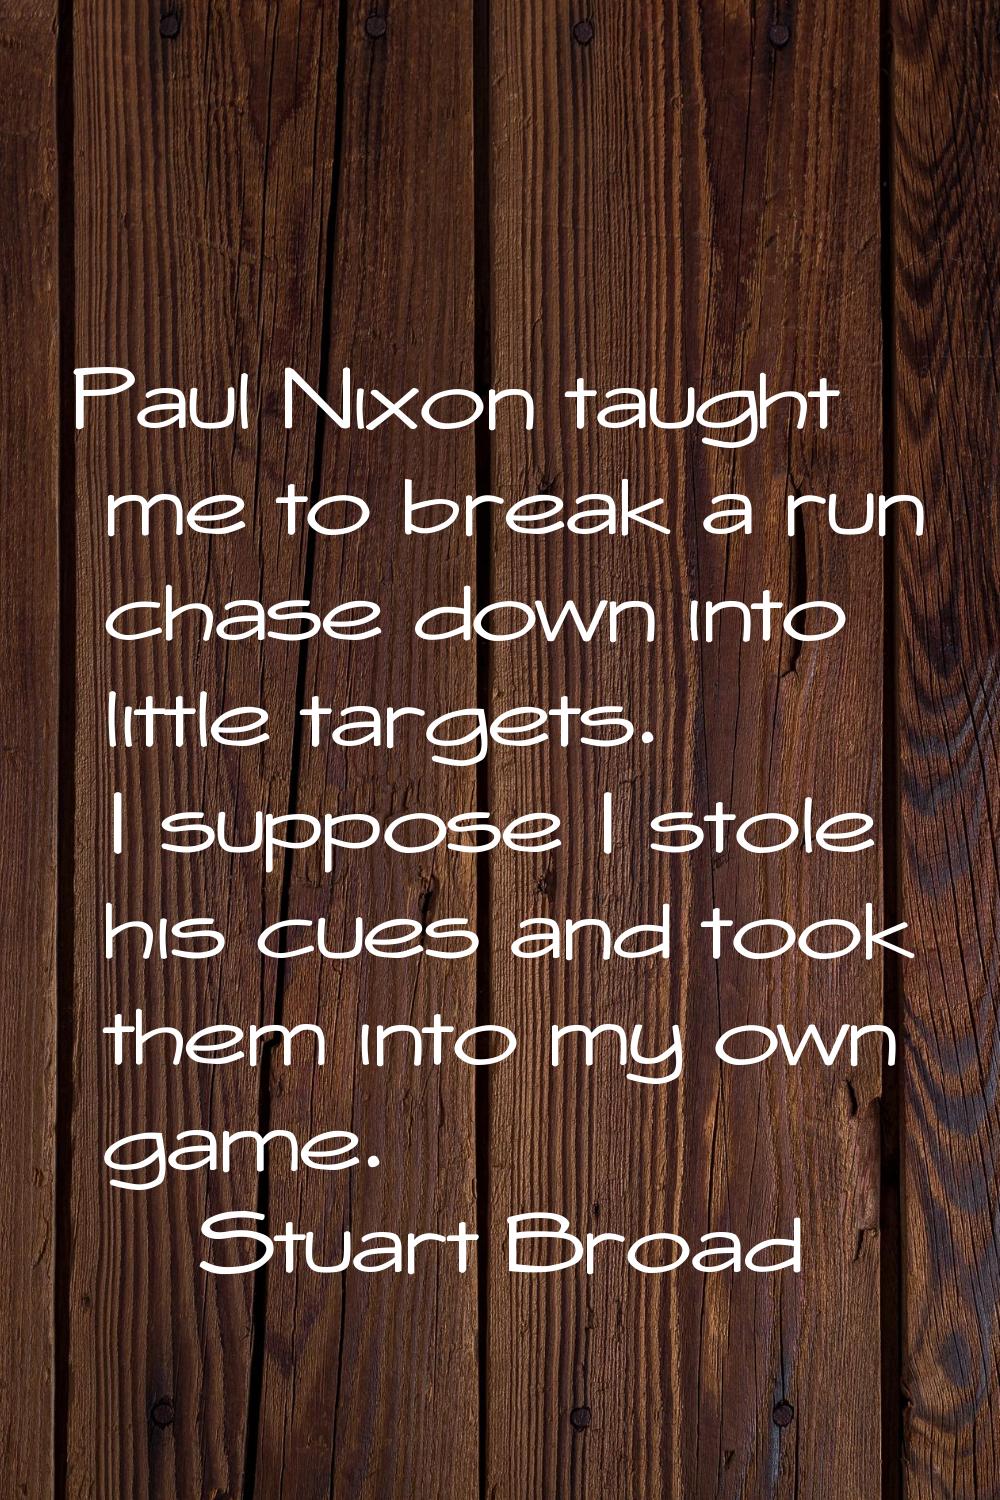 Paul Nixon taught me to break a run chase down into little targets. I suppose I stole his cues and 